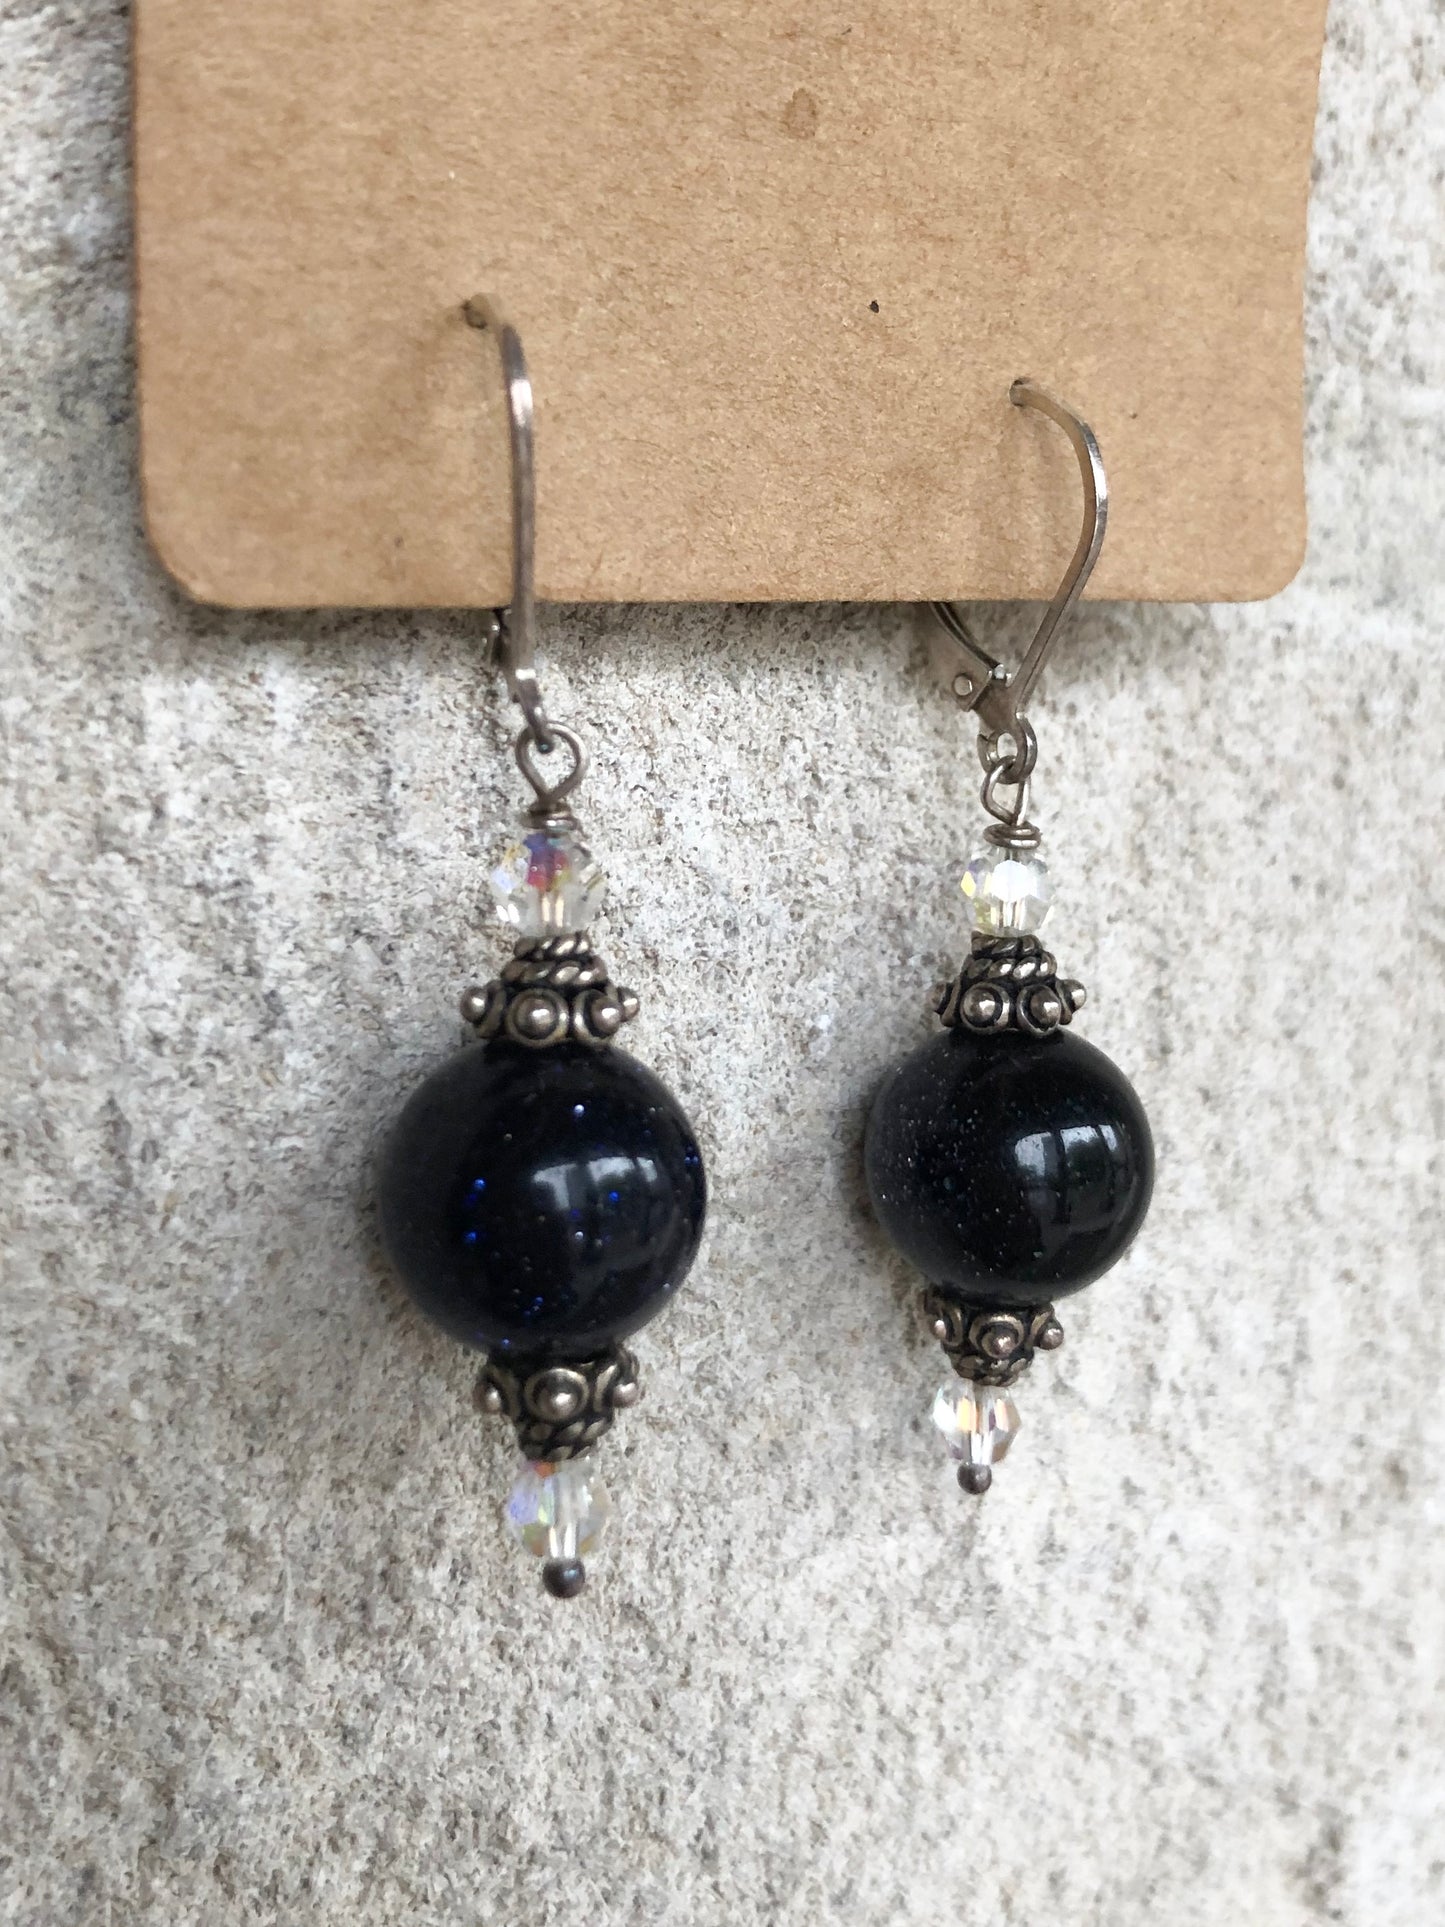 Black Sparkly Drop Bead Earrings - Le Prix Fashion & Consulting